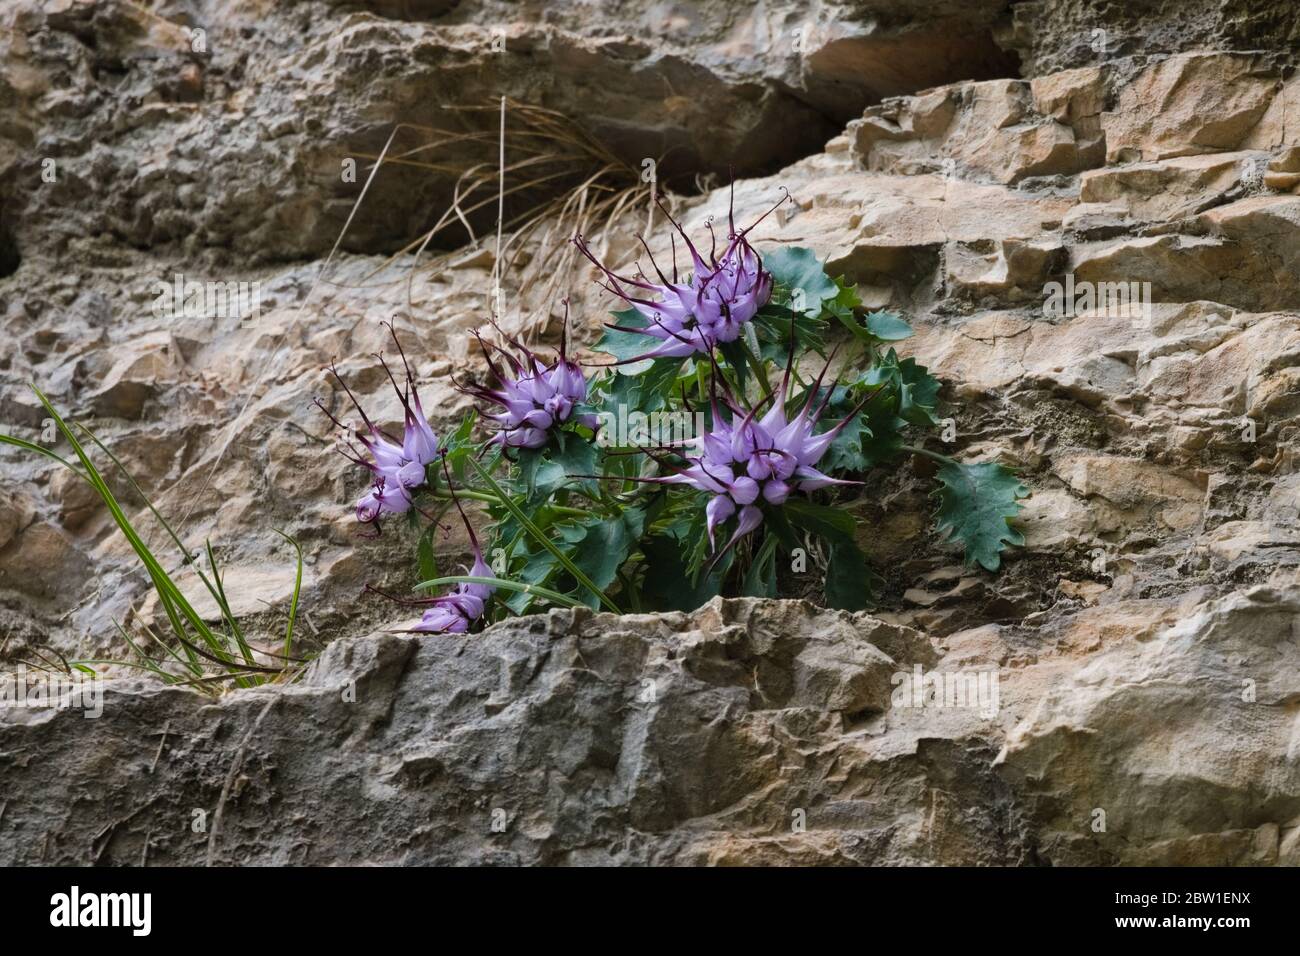 Clusters of Devil's Claw (Physoplexis comosa), a rare alpine plant in flower in the Italian Alps and Dolomiti area. Stock Photo